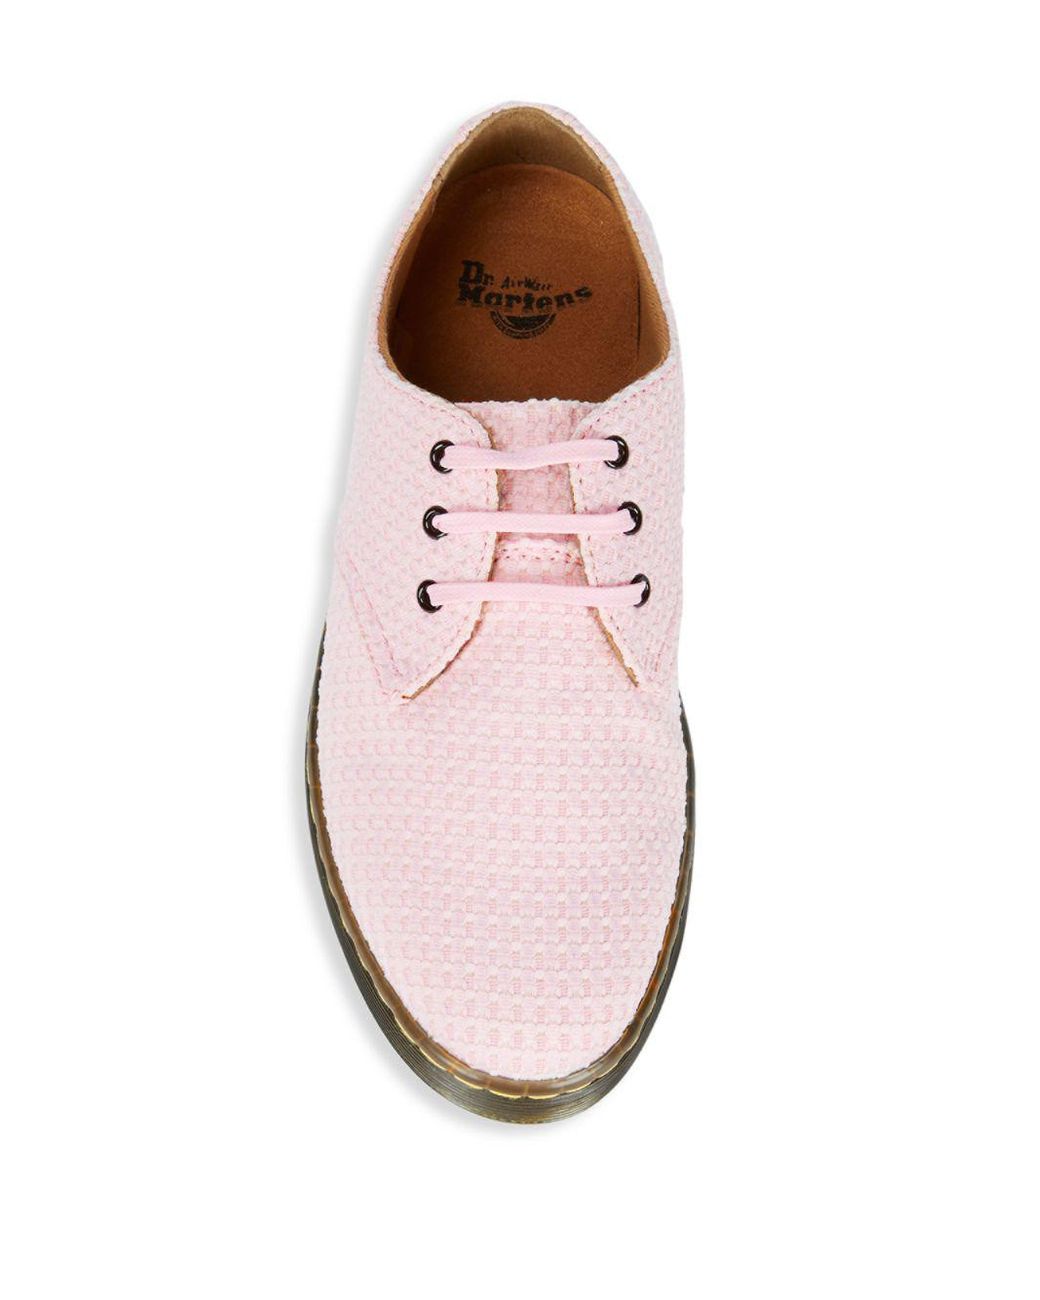 Dr. Martens Gizelle Lace-up Shoes in Pink | Lyst